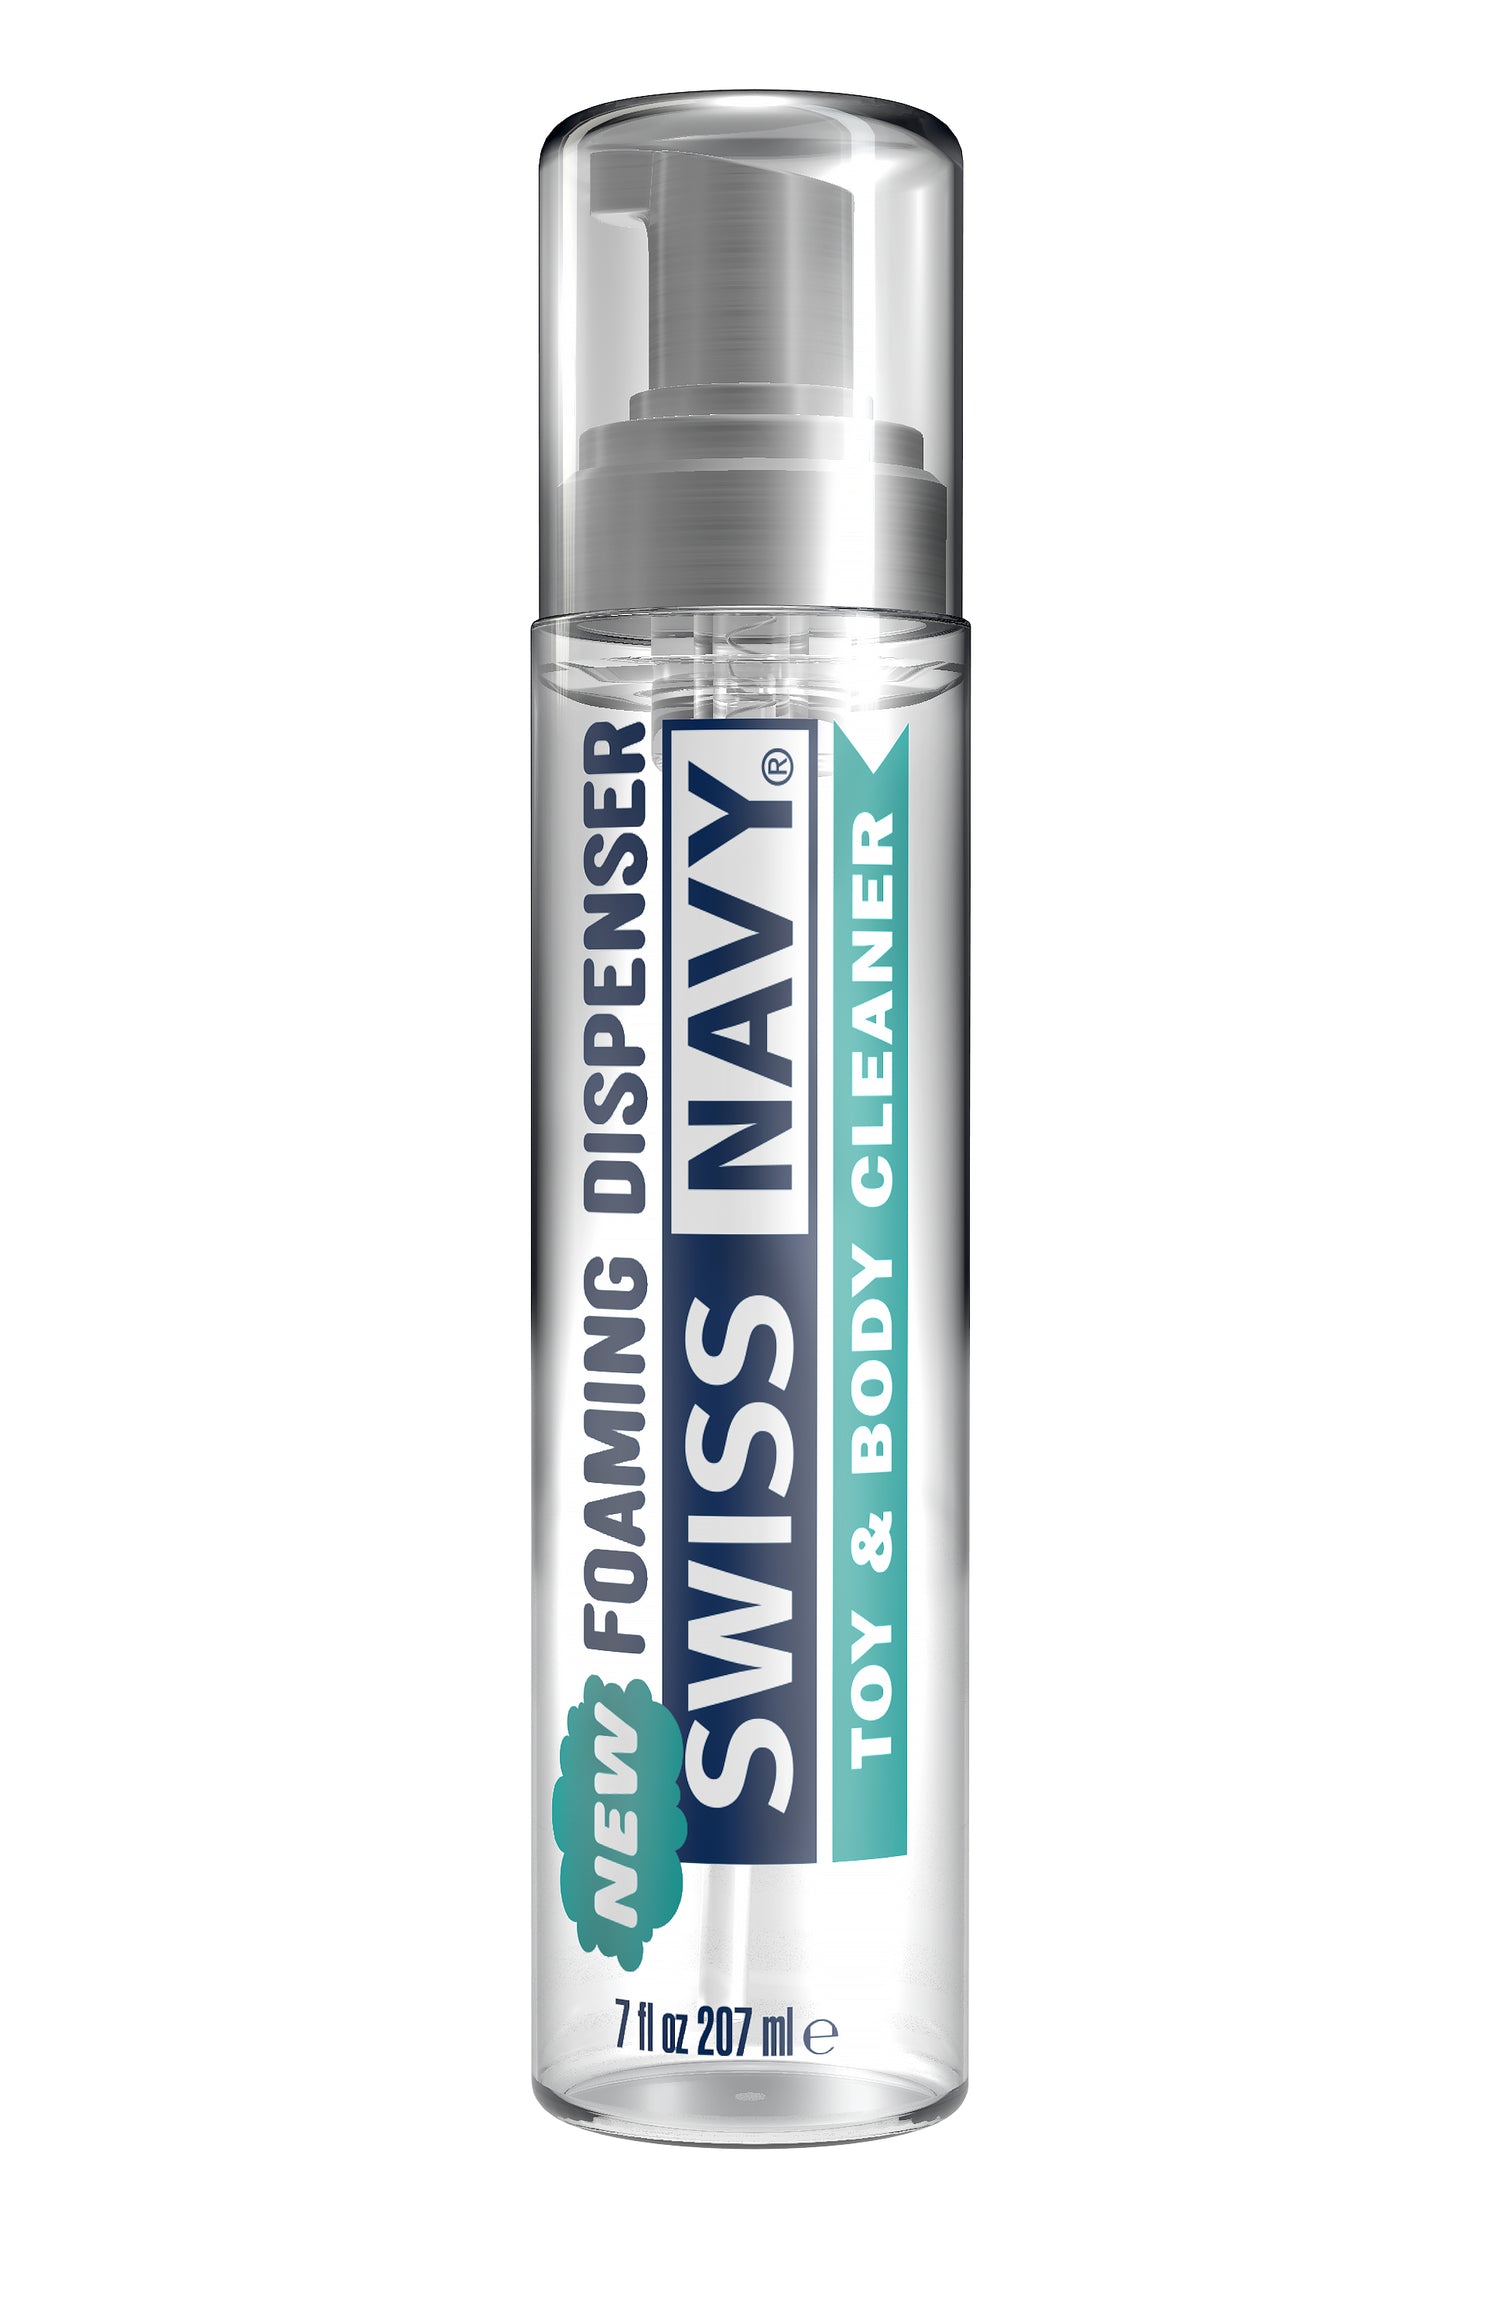 Swiss Navy Toy & Body Cleaner Foam 7oz - Just for you desires